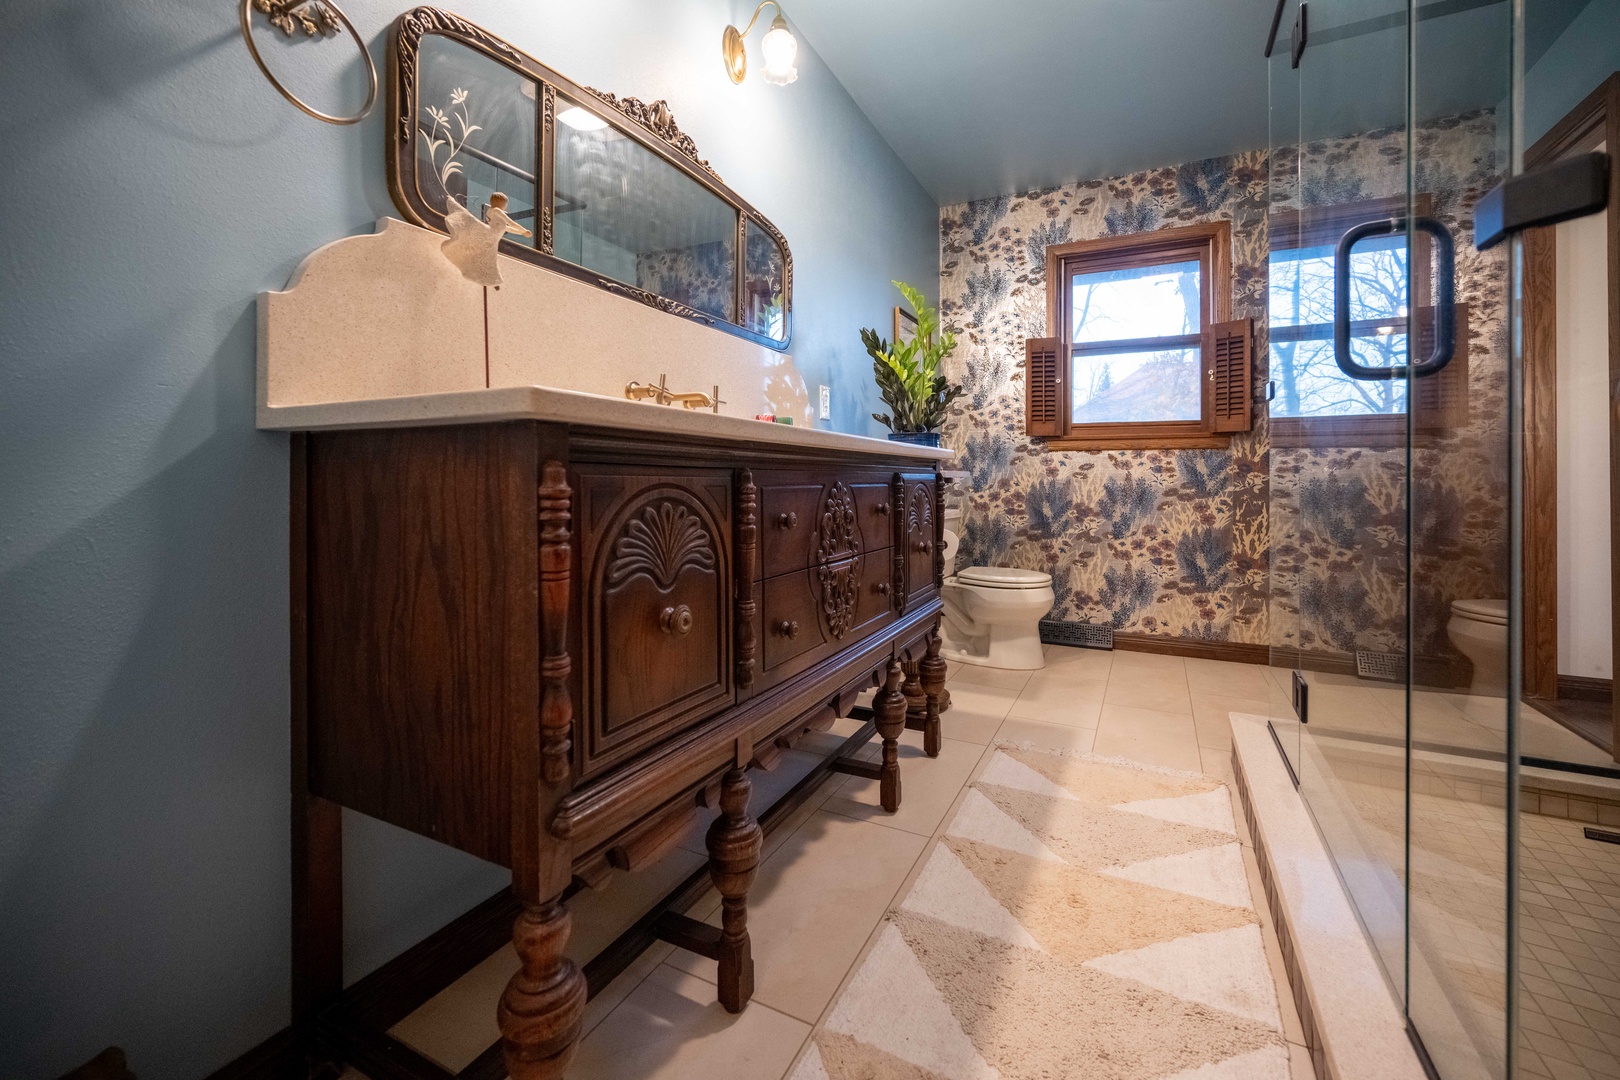 This 2nd floor full bathroom offers a gorgeous vanity & glass shower